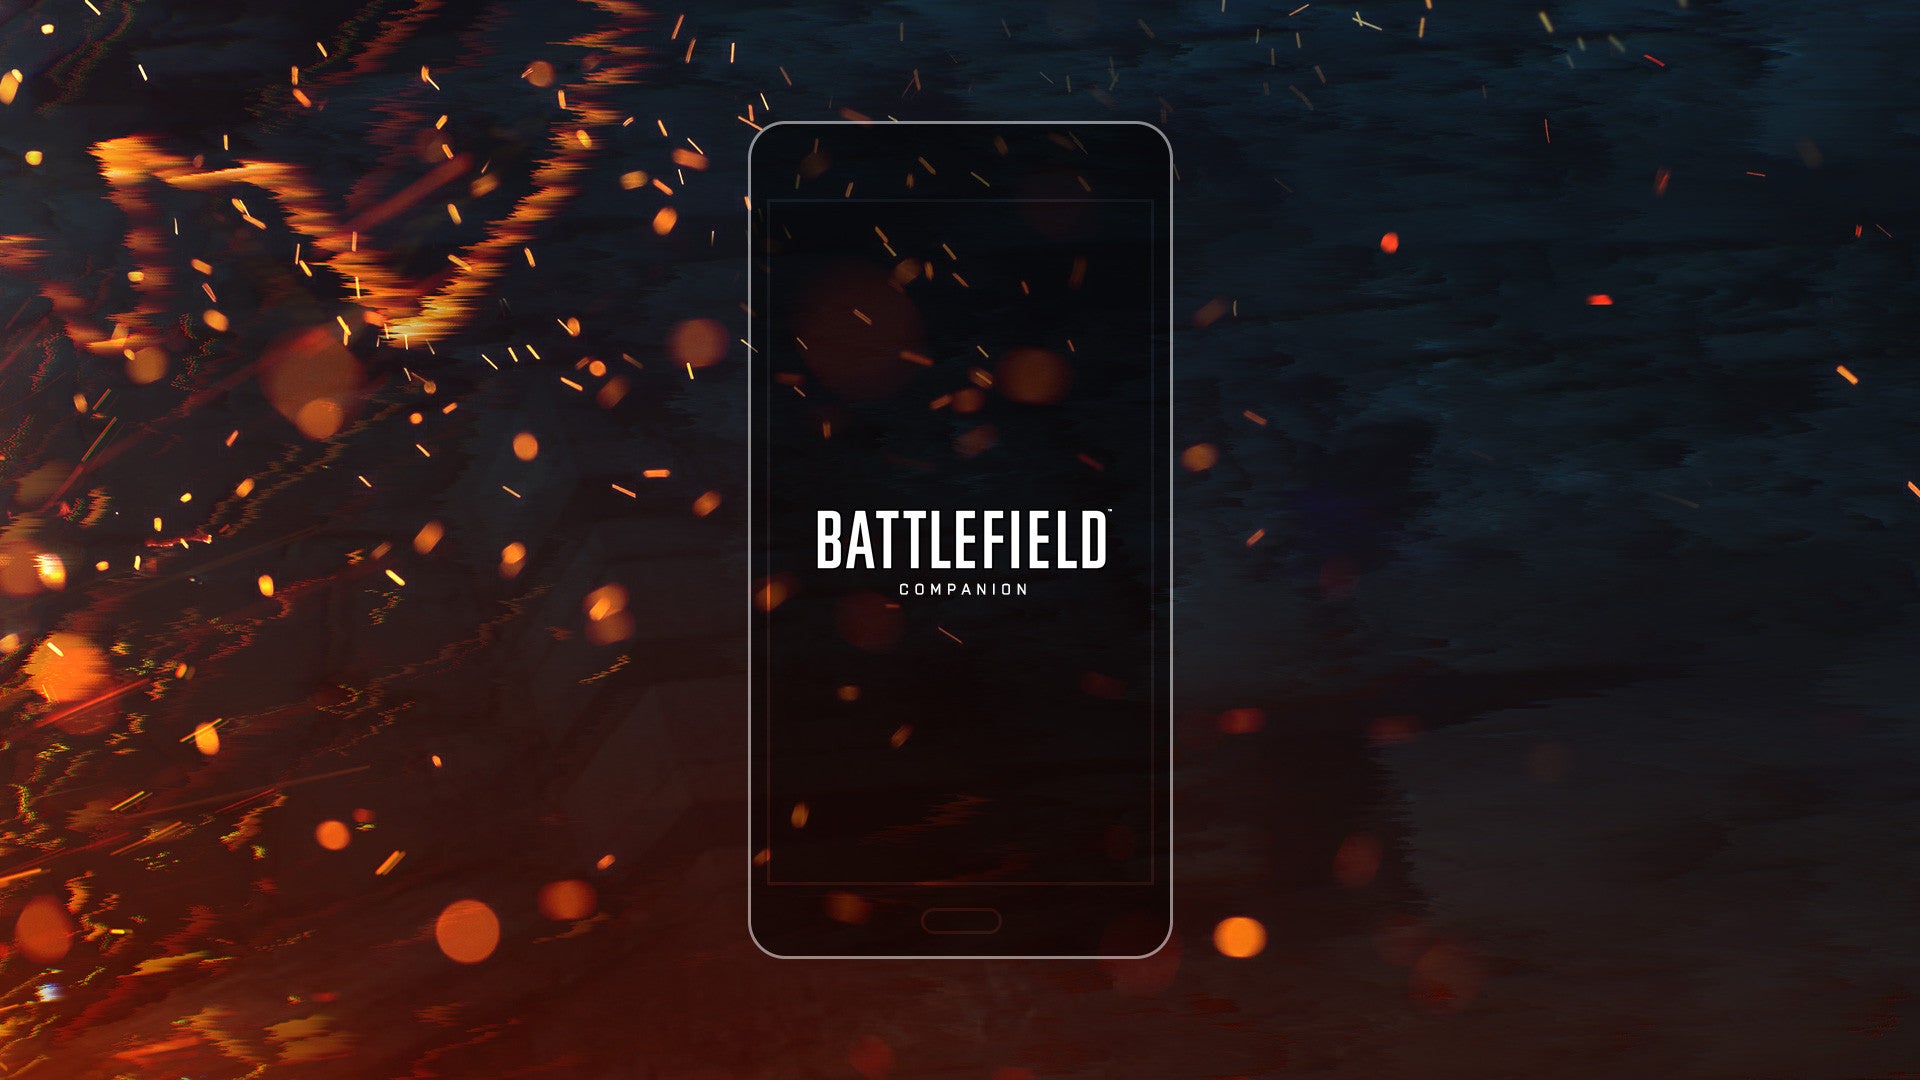 New Battlefield Companion app unleashed on Android, iOS and Windows 10 Mobile